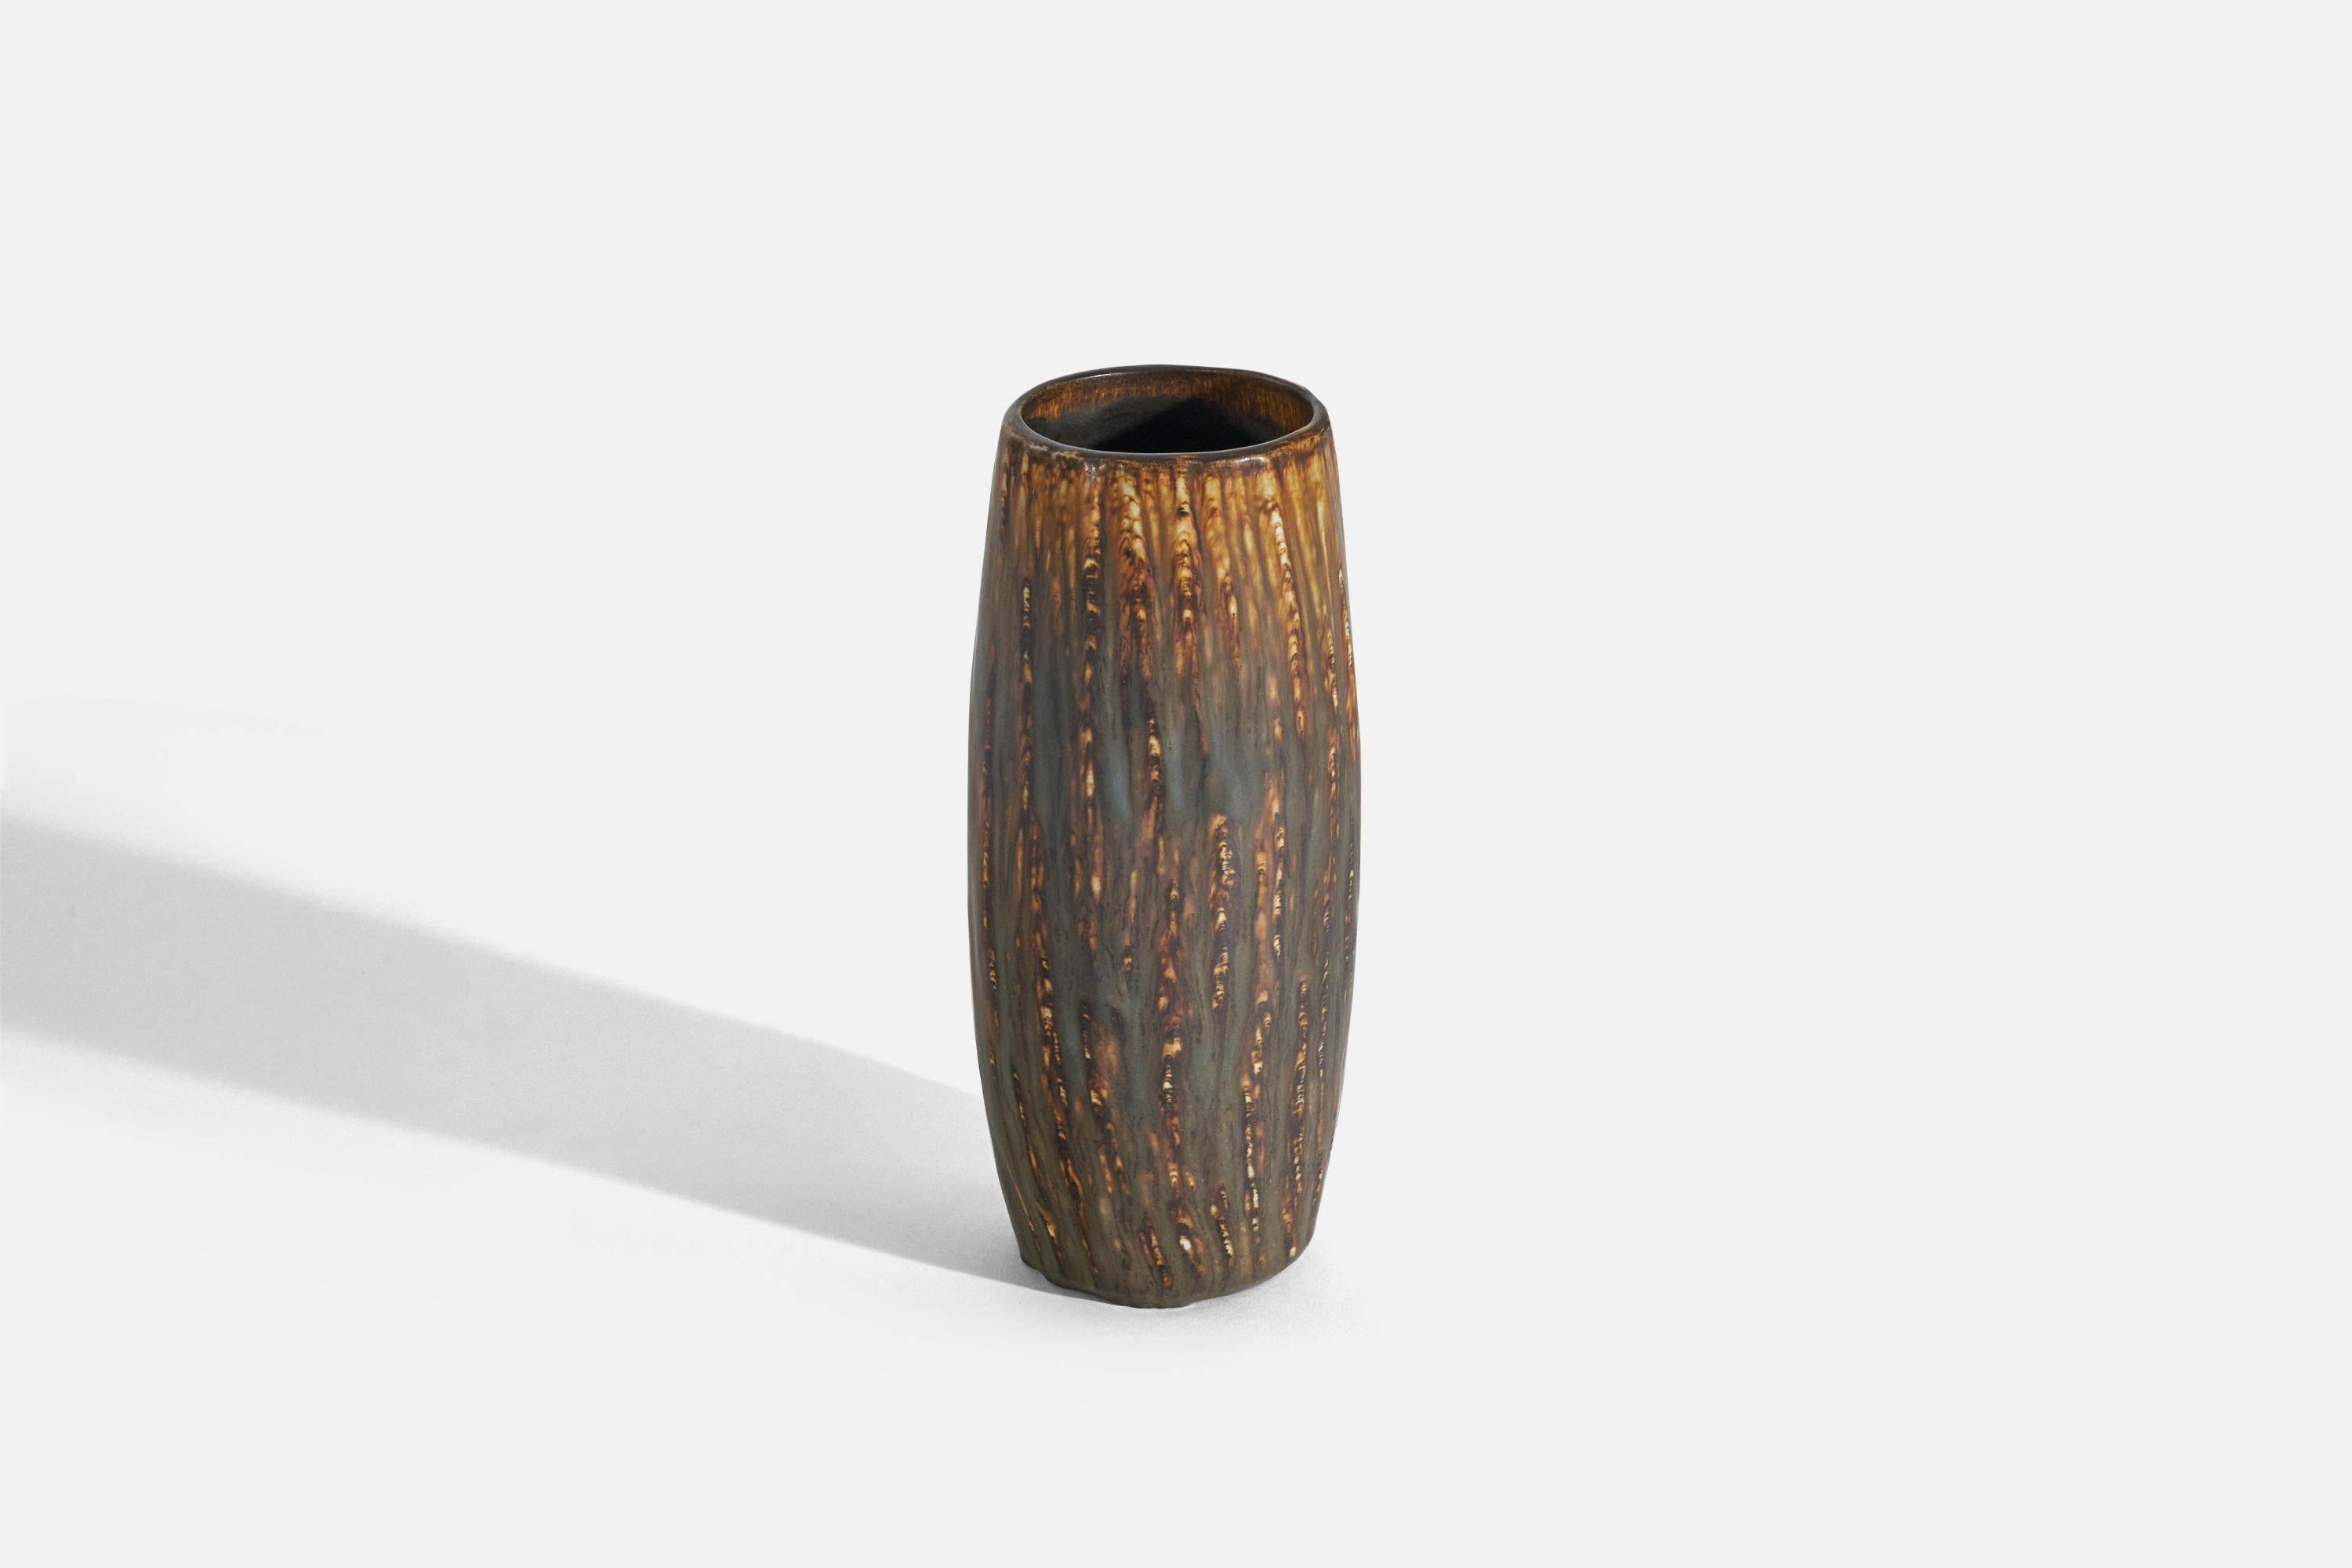 A brown and yellow-glazed stoneware vase designed by Gunnar Nylund and produced by Rörstrand, Sweden, 1950s.